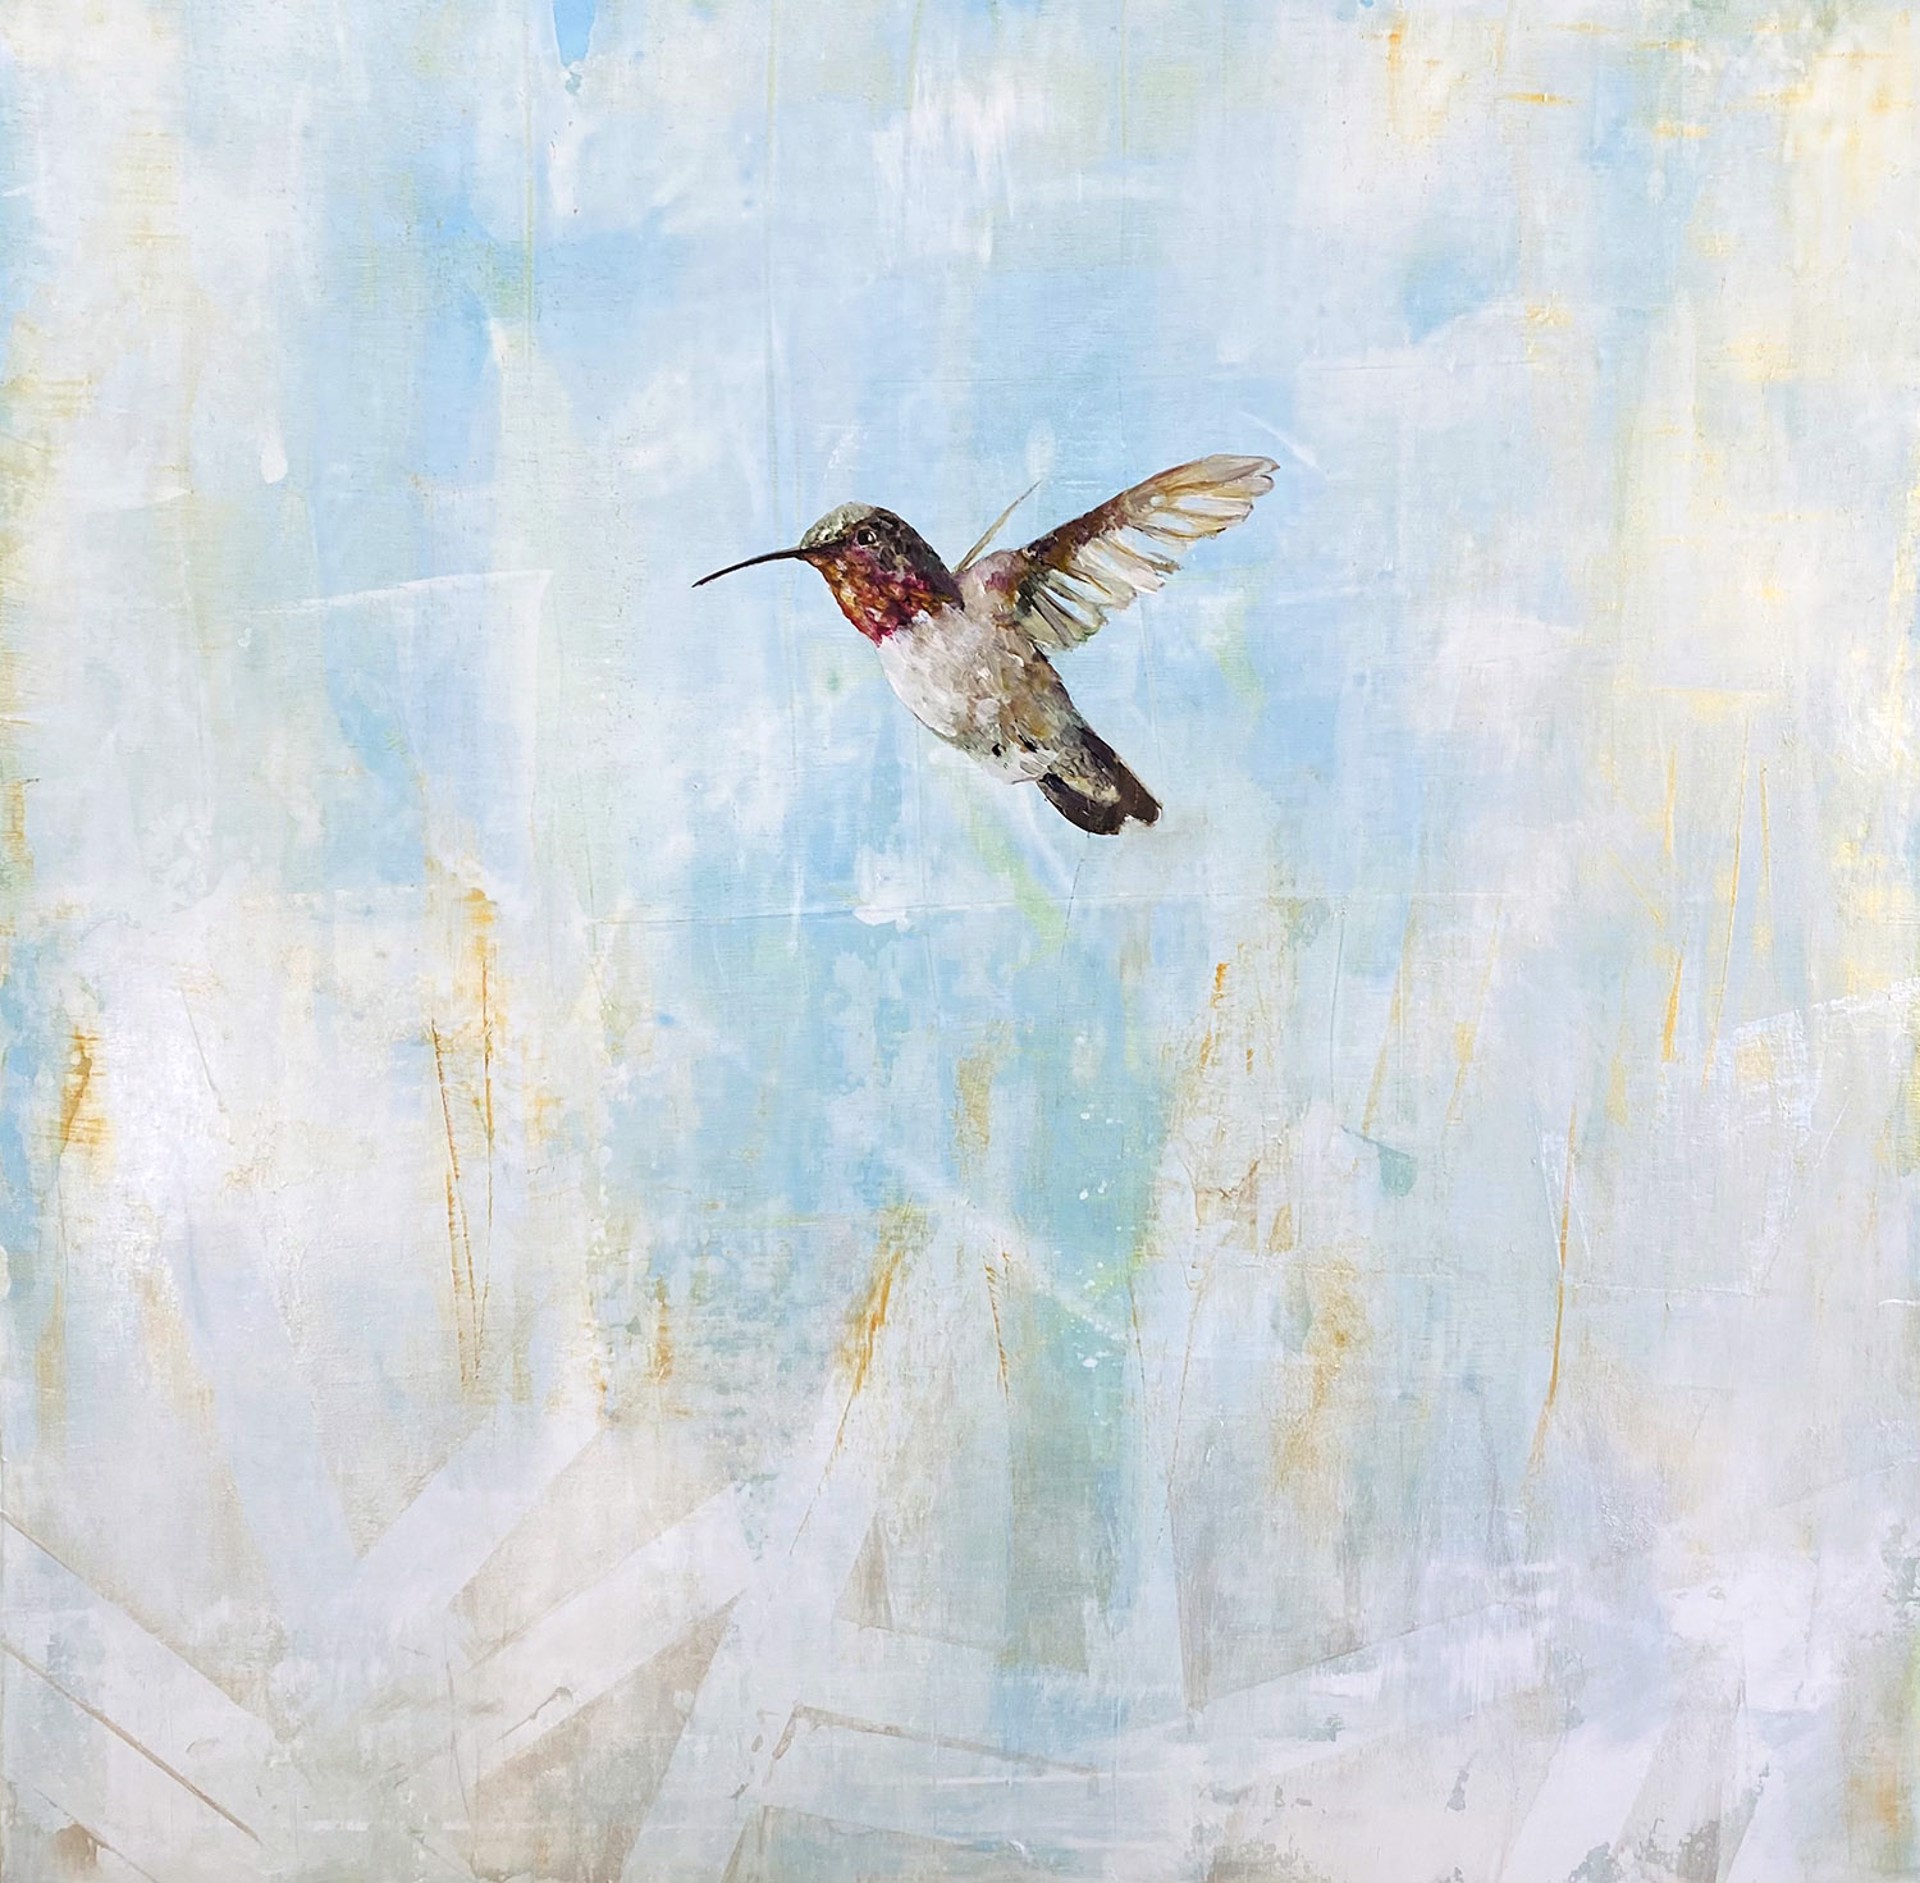 A Contemporary Painting Of A Flying Hummingbird On A Blue And Gold Background By Jenna Von Benedikt At Gallery Wild